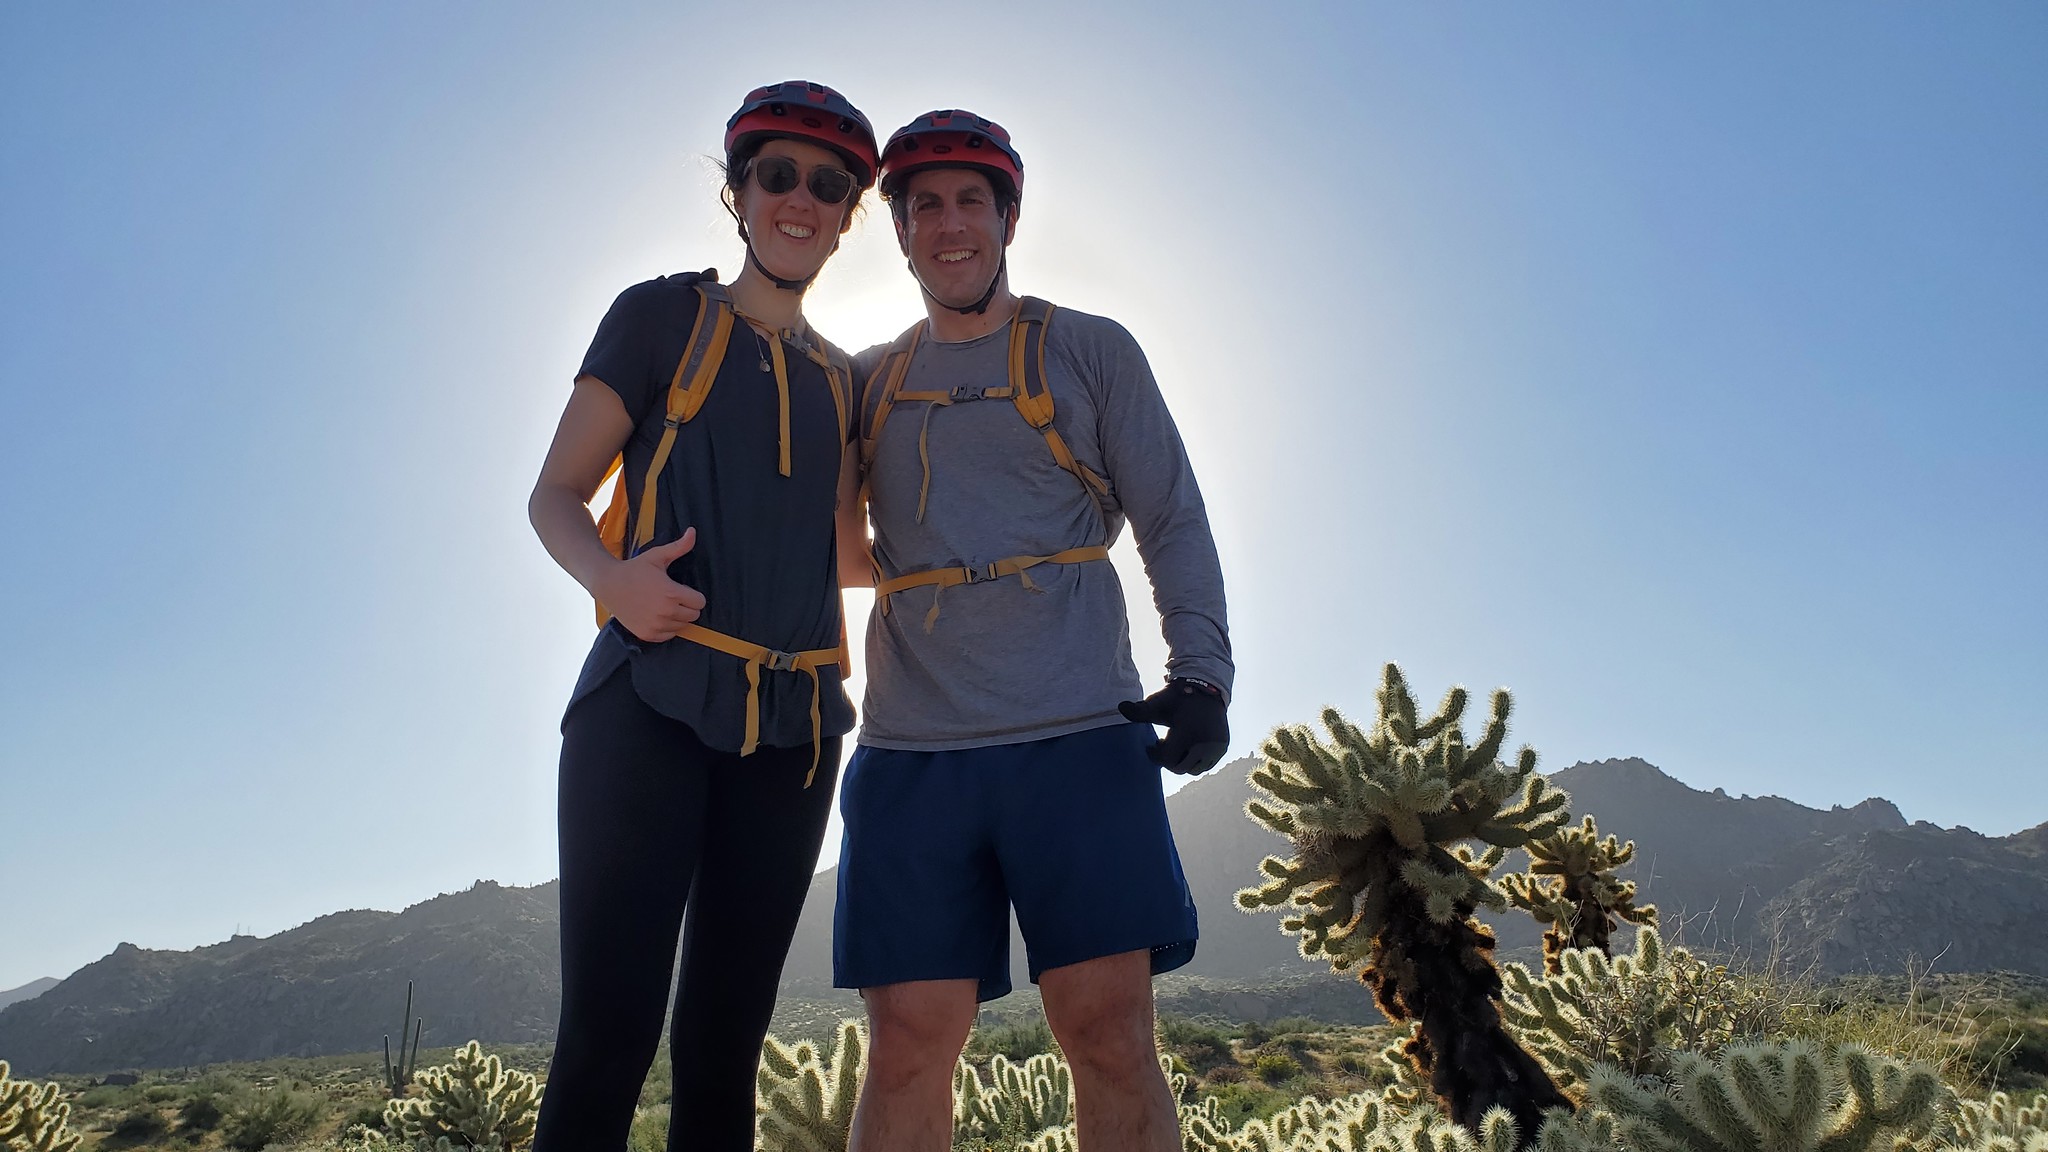 With the sun shining brightly behind them, and standing in the midst of the sticky Teddy Bear Cactus, a smiling couple are all thumbs up about their memorable Phoenix adventure tour with the Wild Bunch Desert Guides.